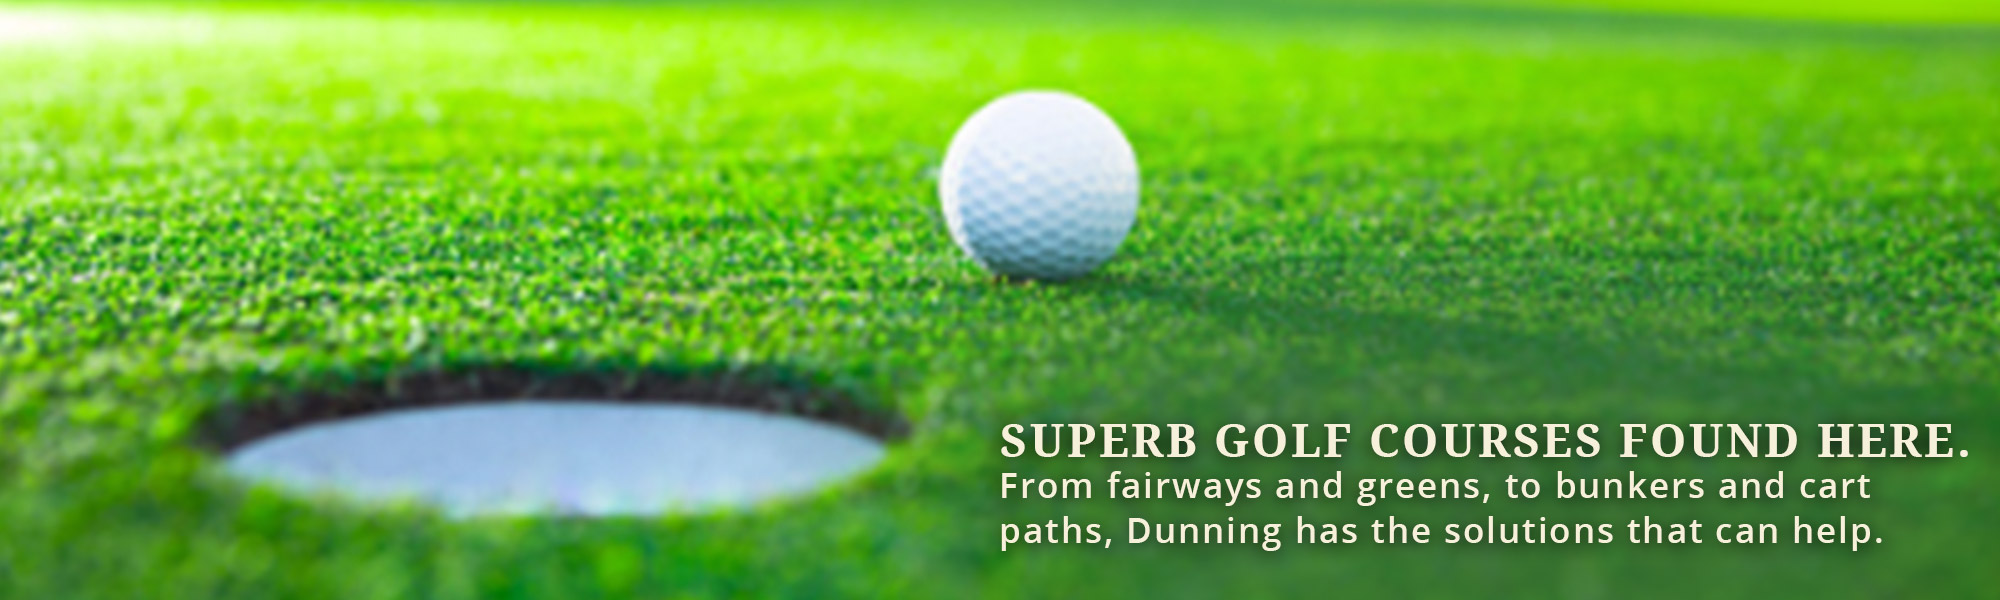 Supurb golf courses found here.